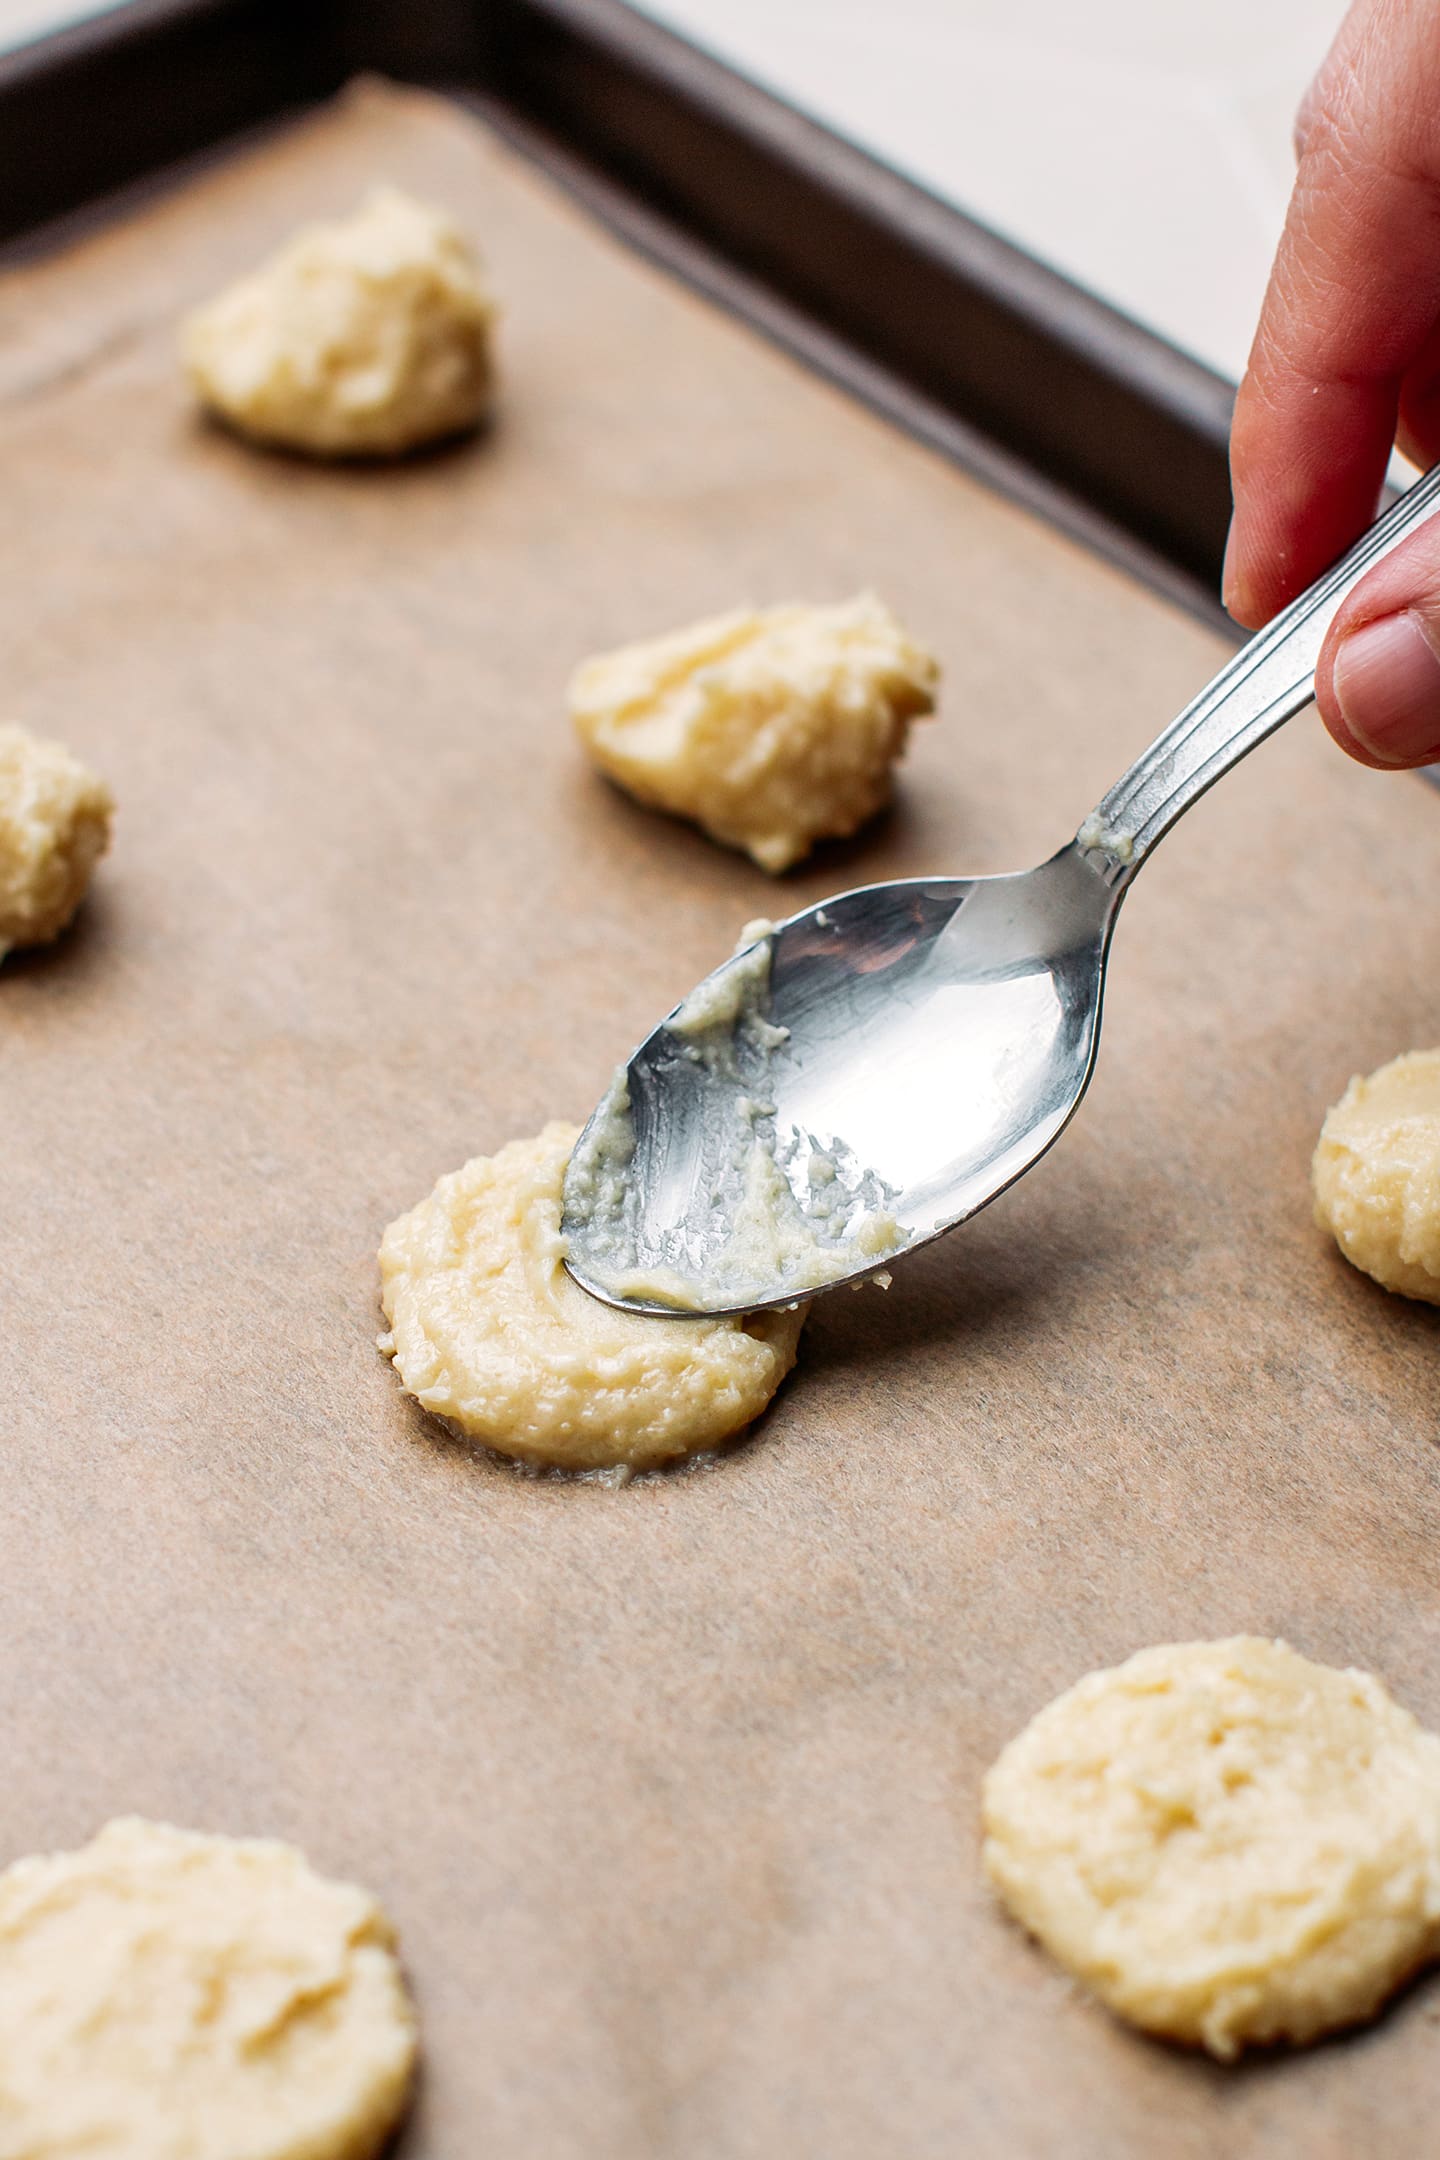 Spreading cookie batter on a baking sheet.